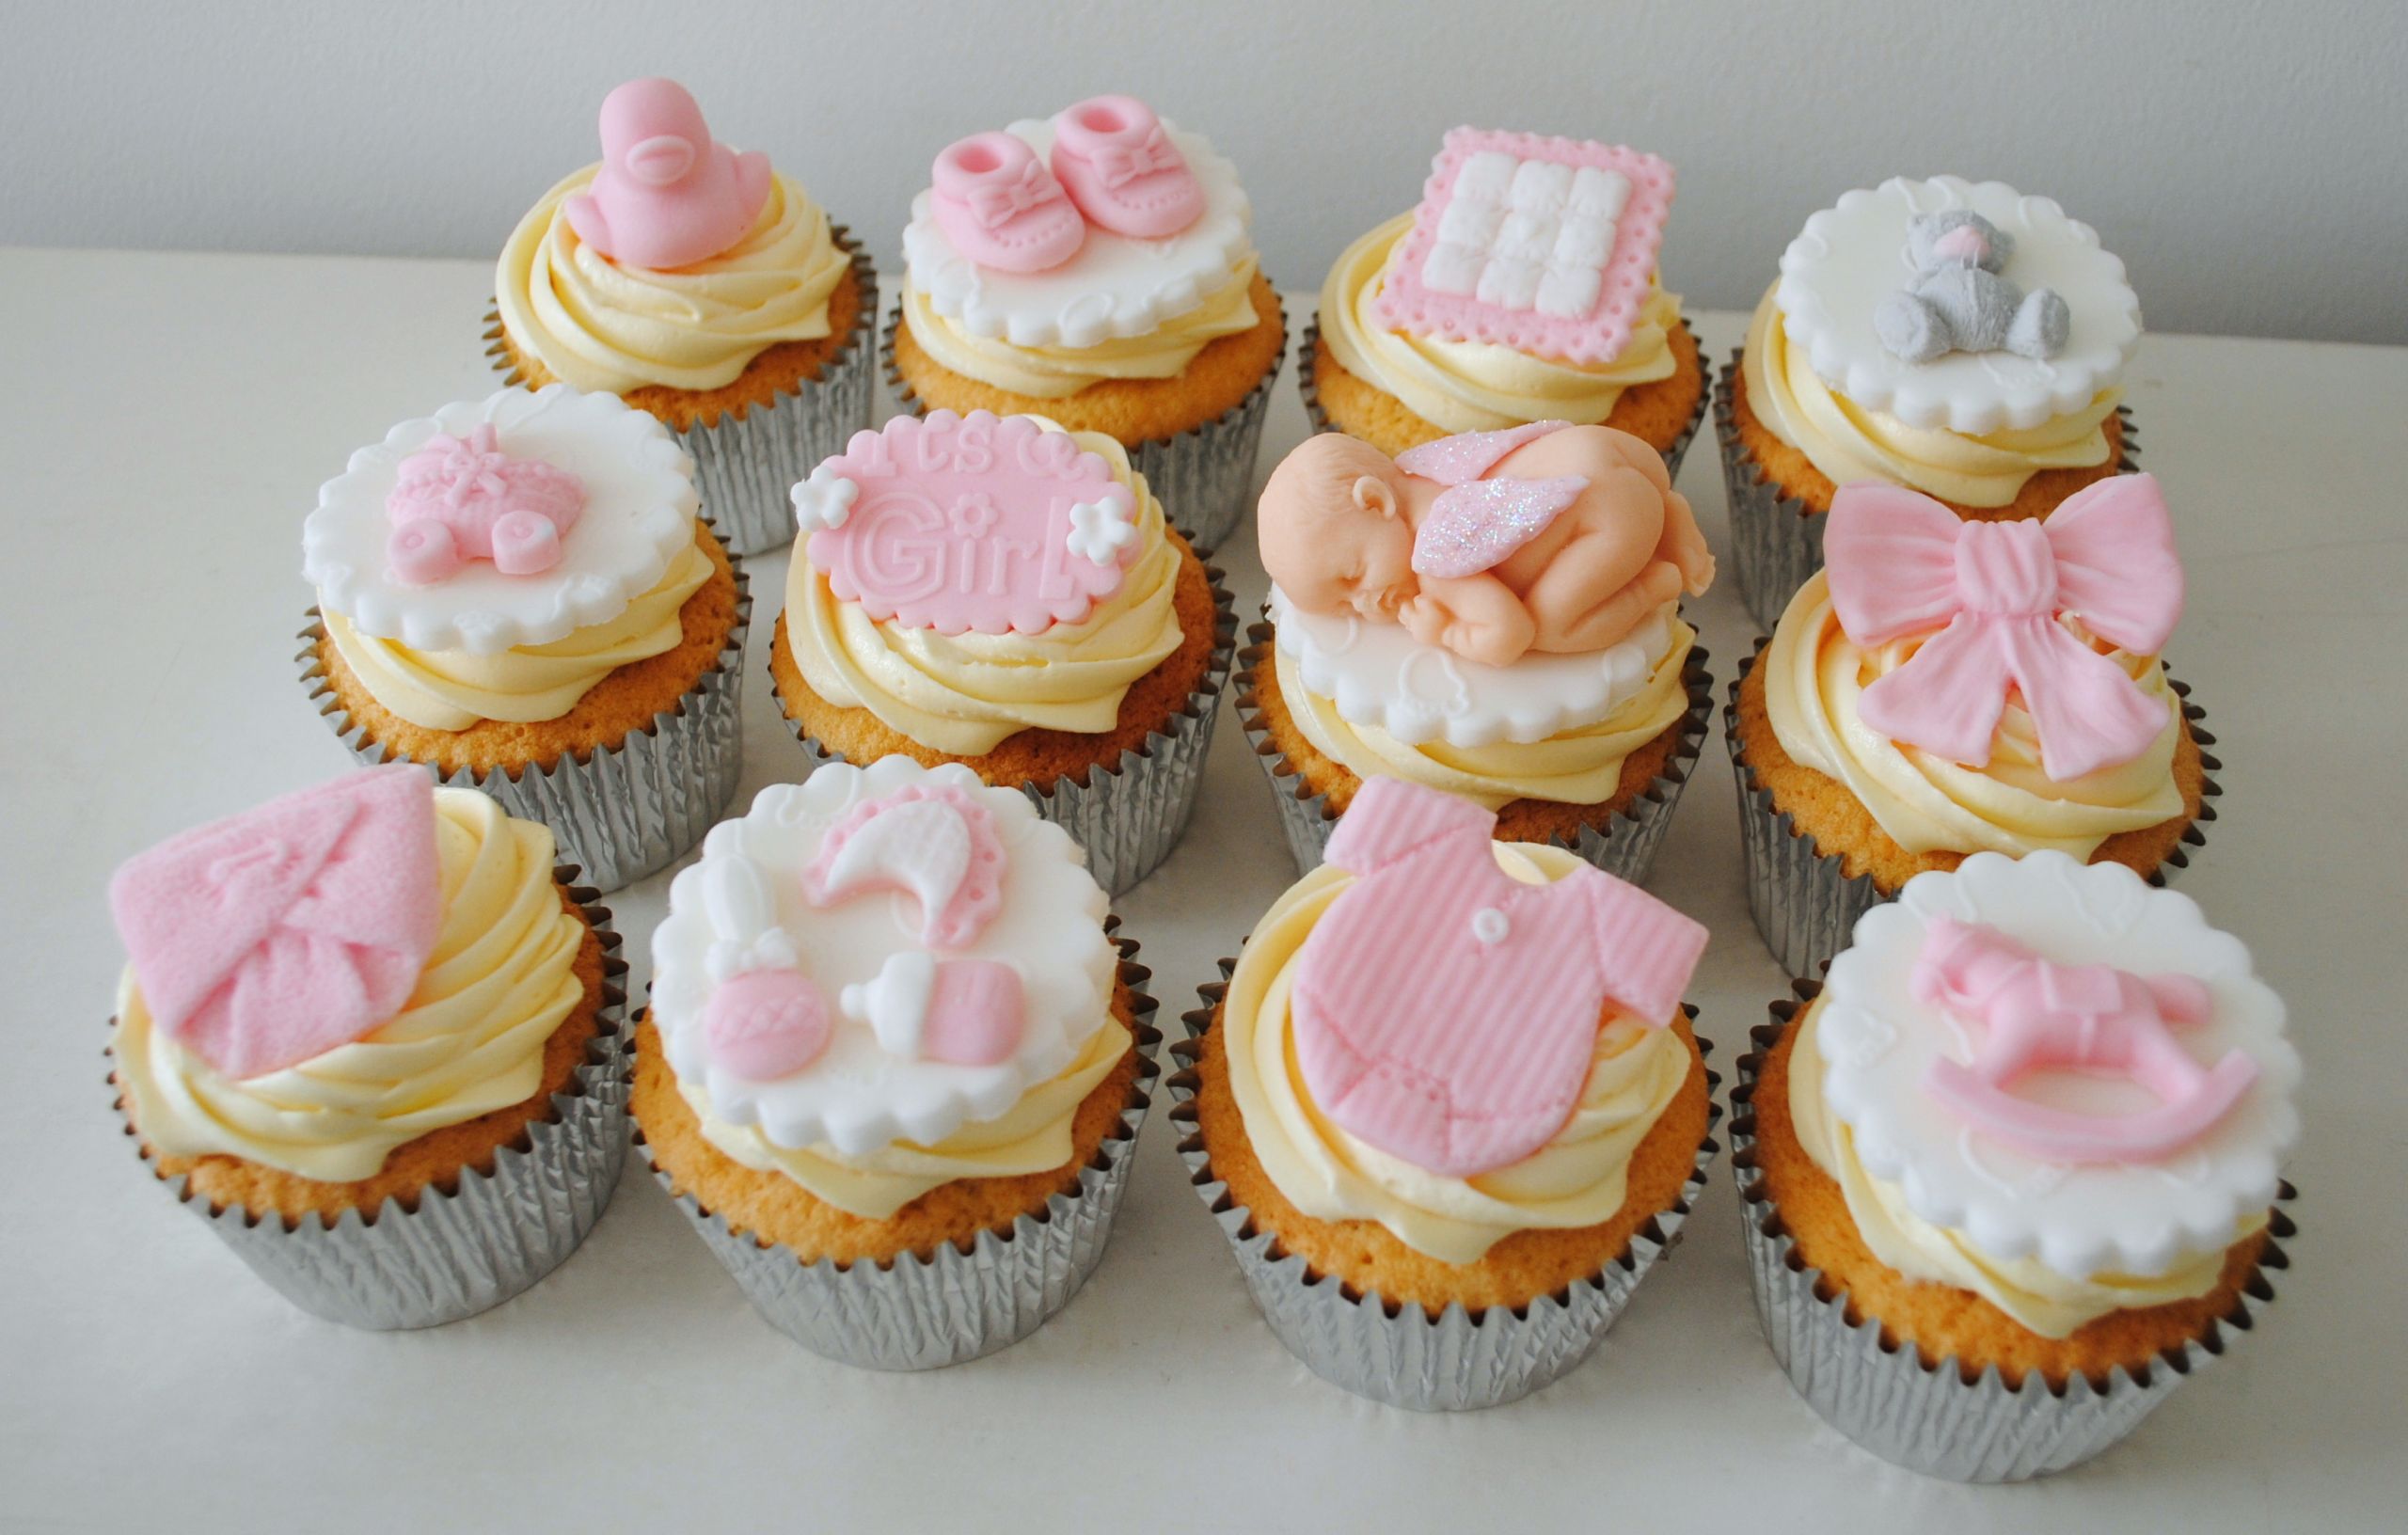 Baby Shower Cupcakes For A Girl
 Miss Cupcakes Blog Archive Girl Baby Shower Cupcakes 12